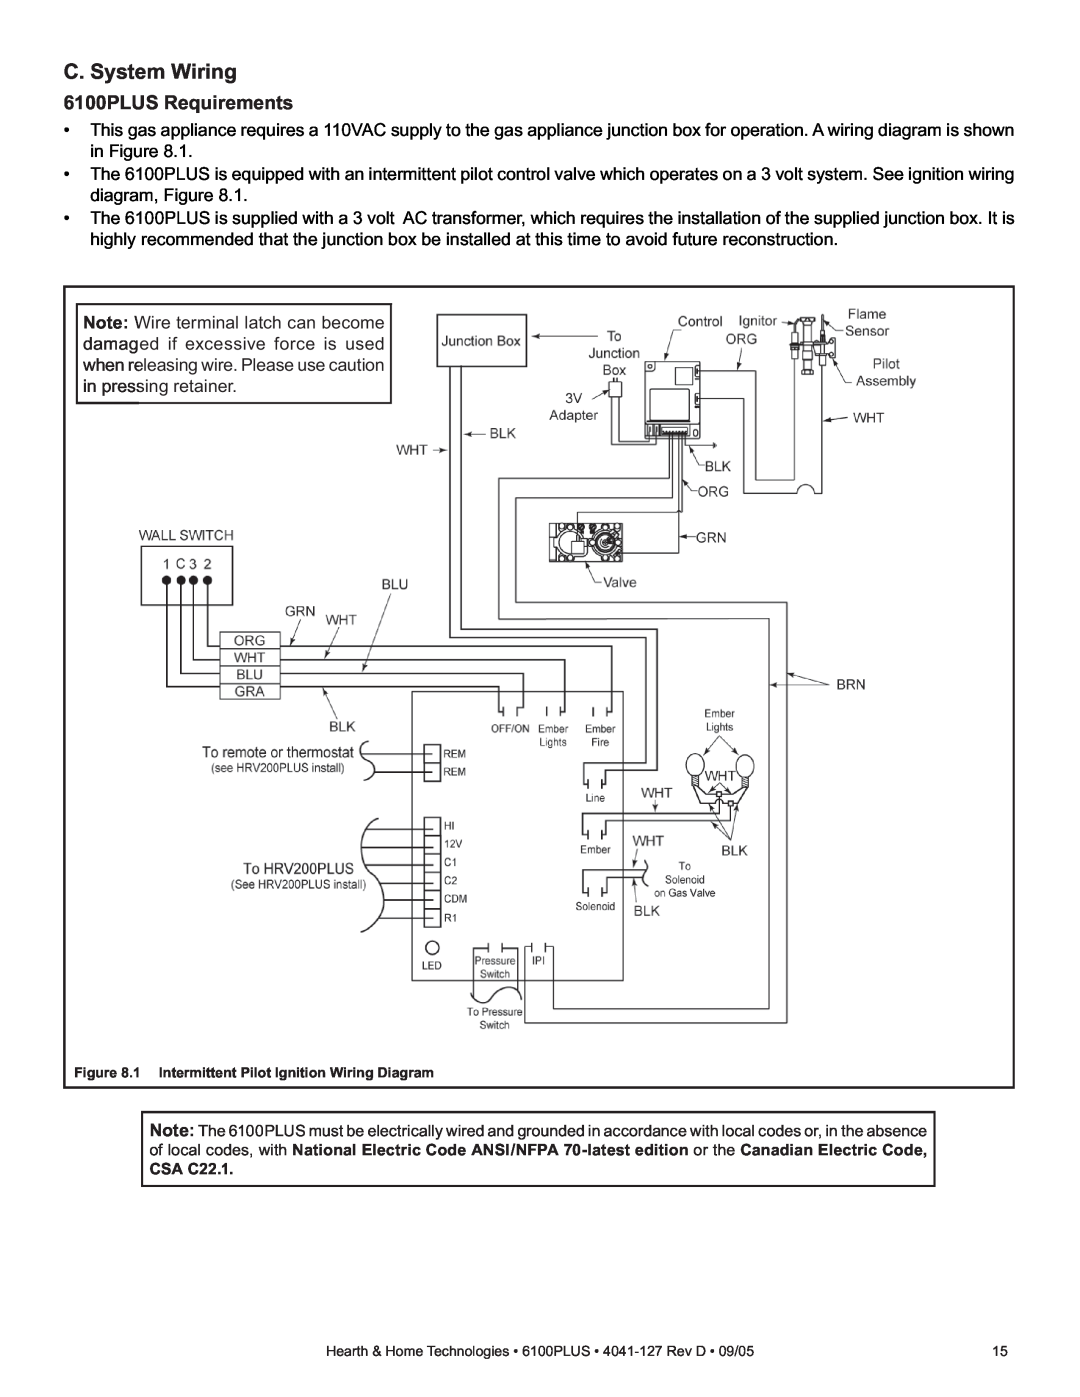 Heat & Glo LifeStyle owner manual C. System Wiring, 6100PLUS Requirements 